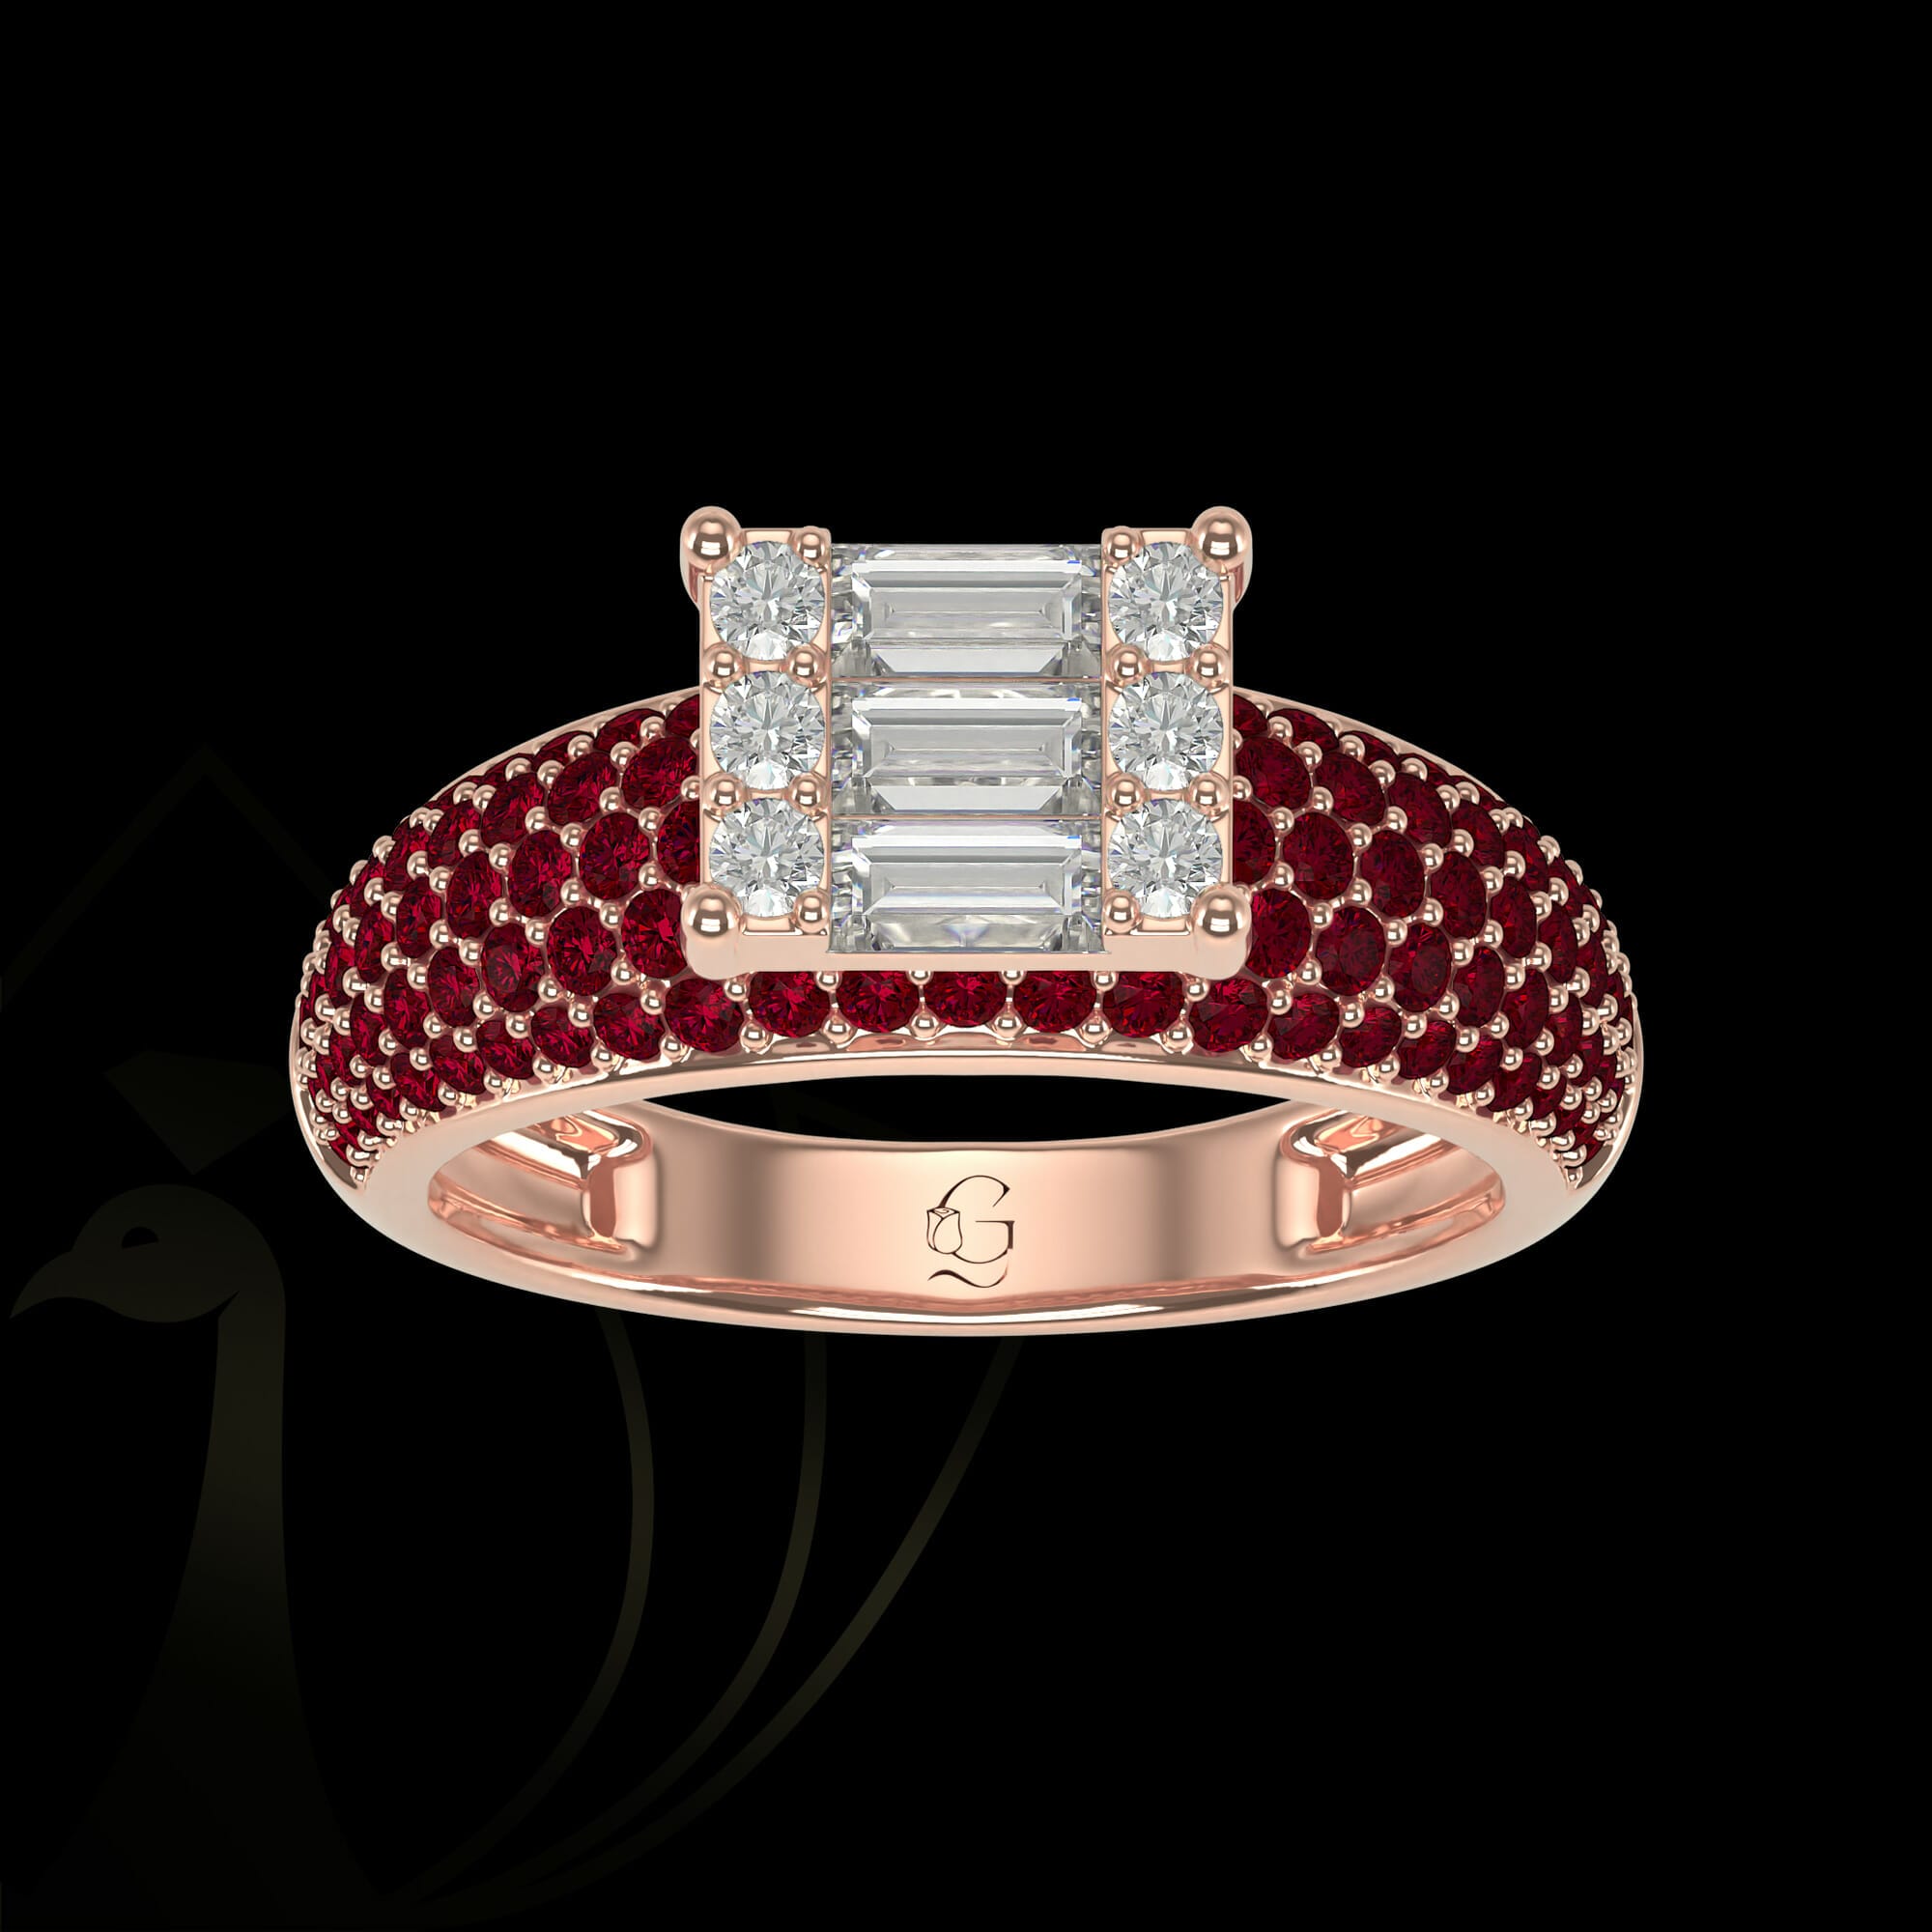 Sparkle on Me Diamond Ring from our exclusive Gulz Collection